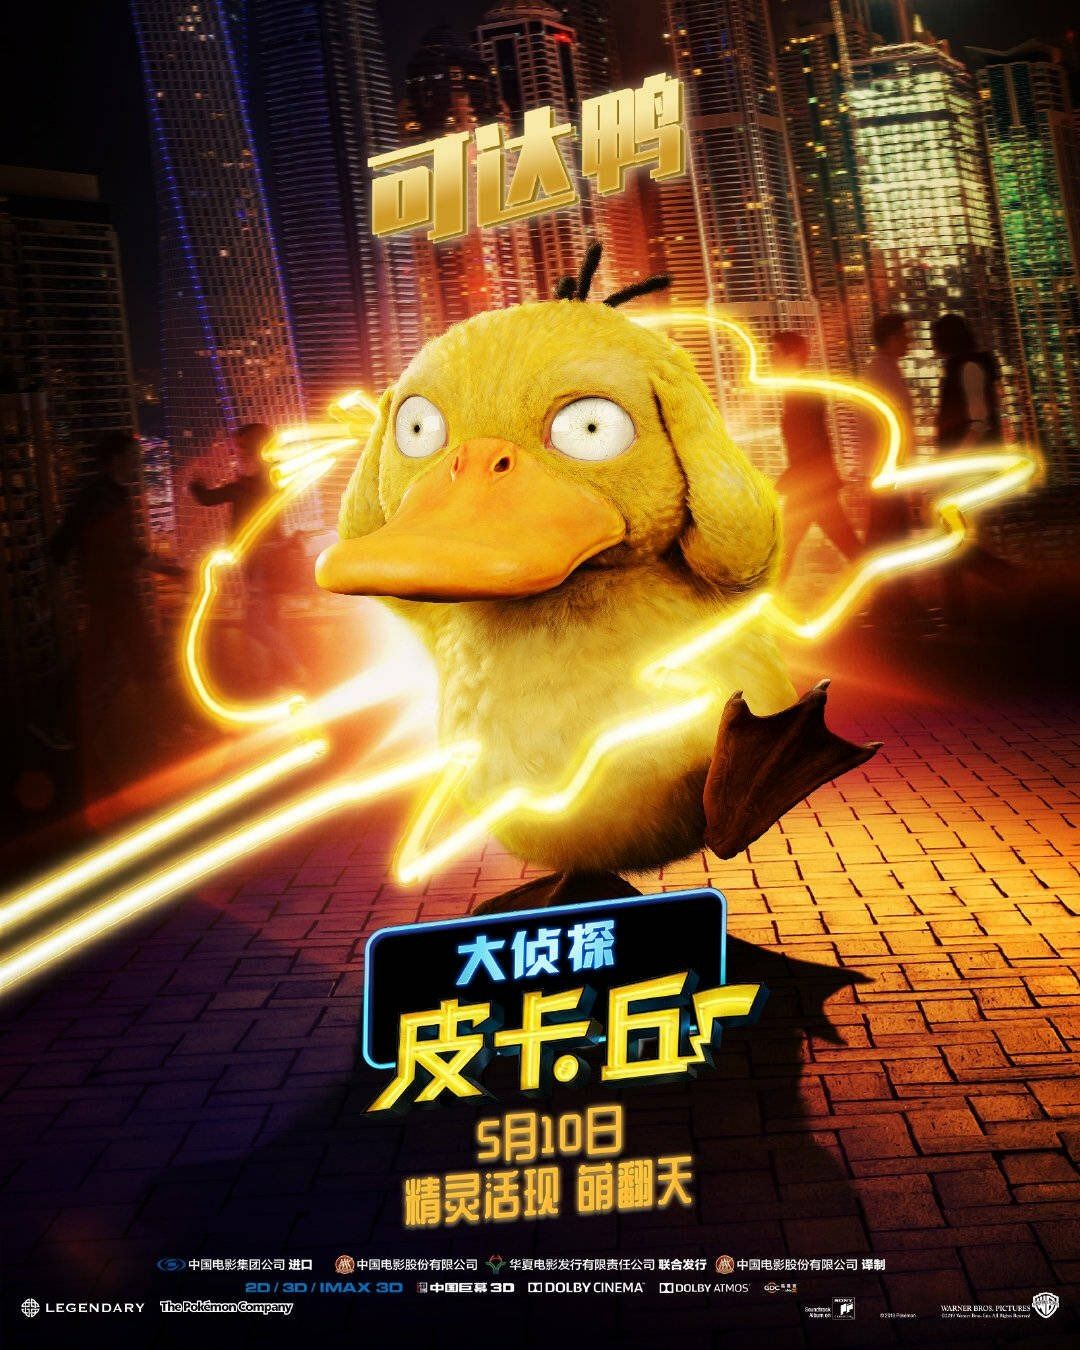 Detective Pikachu character poster #3